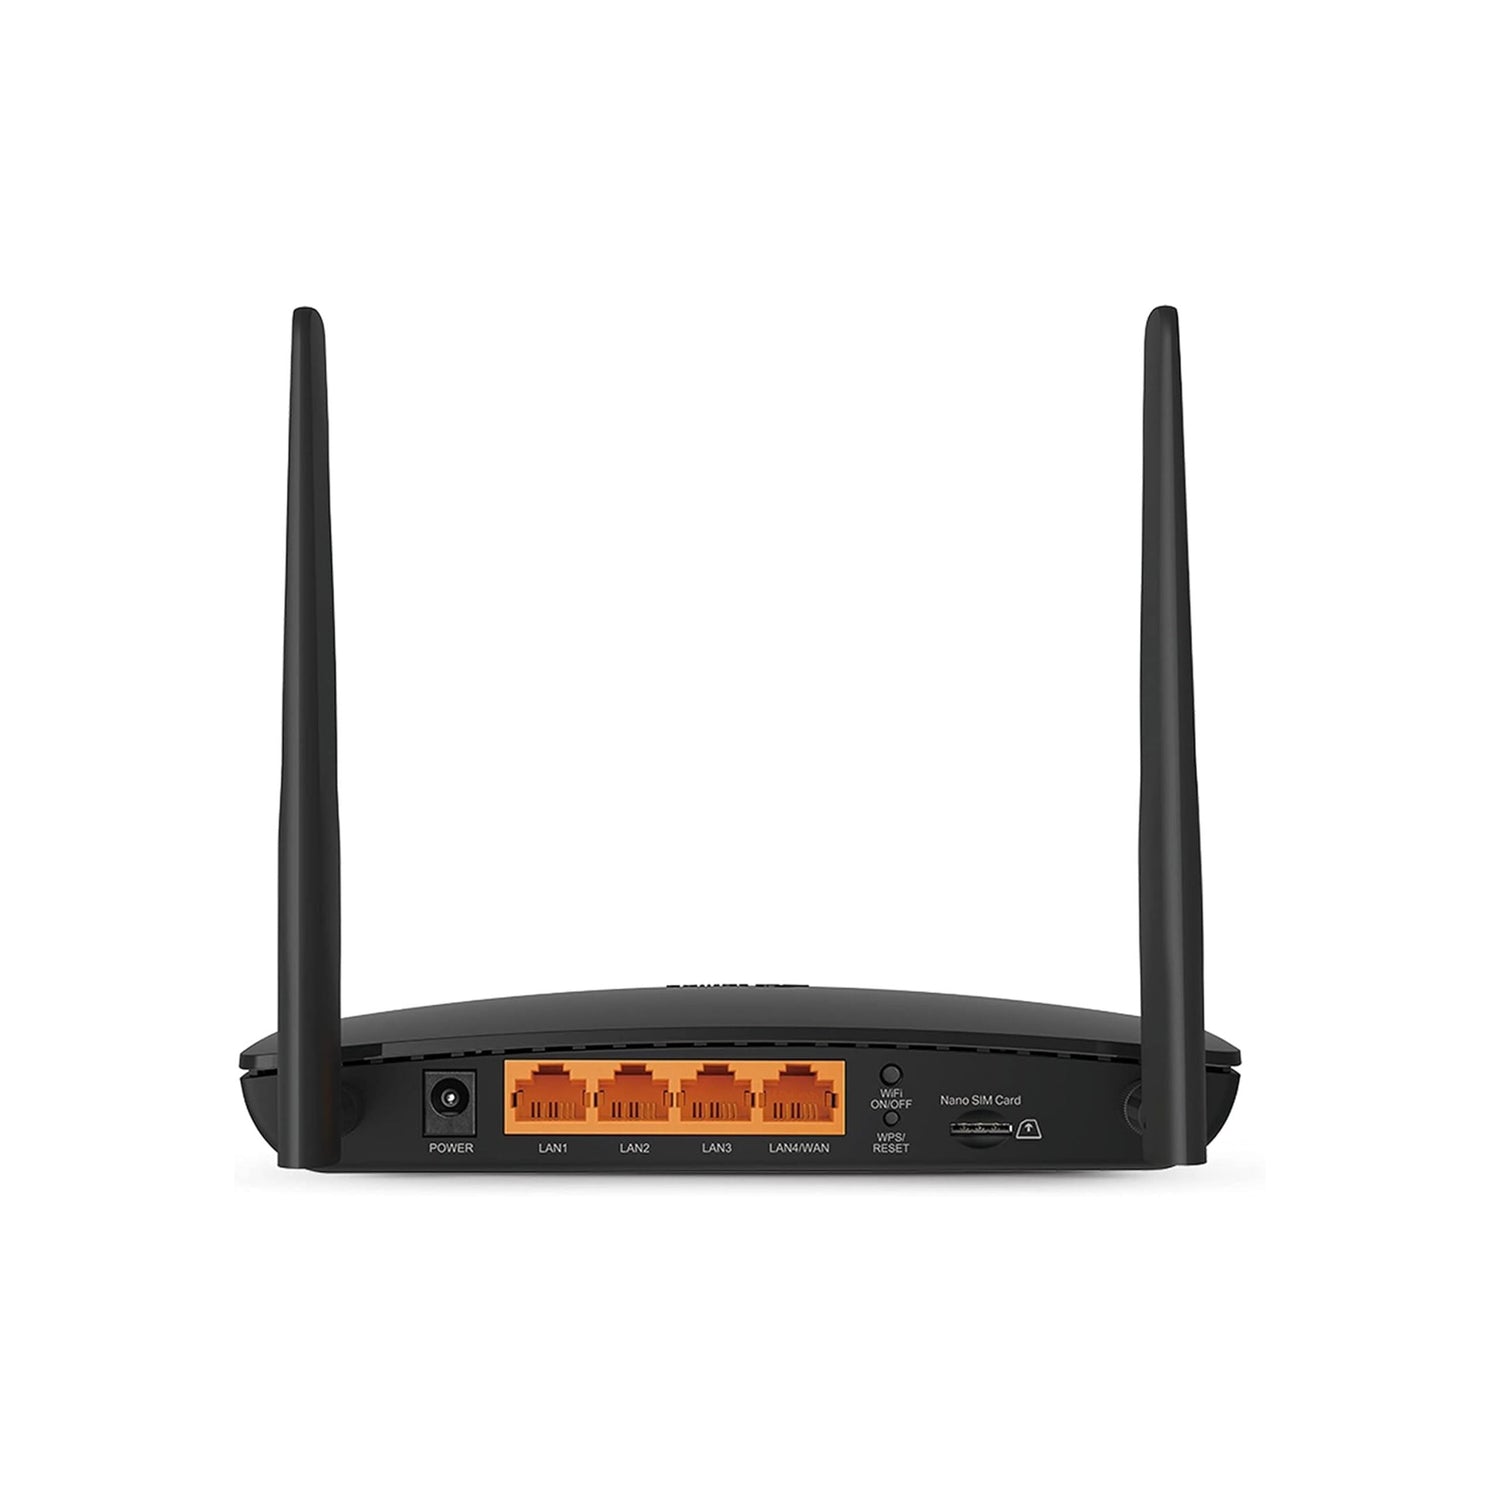 TP-Link AC750 Dual Band Wi-Fi 4G LTE Router - Black